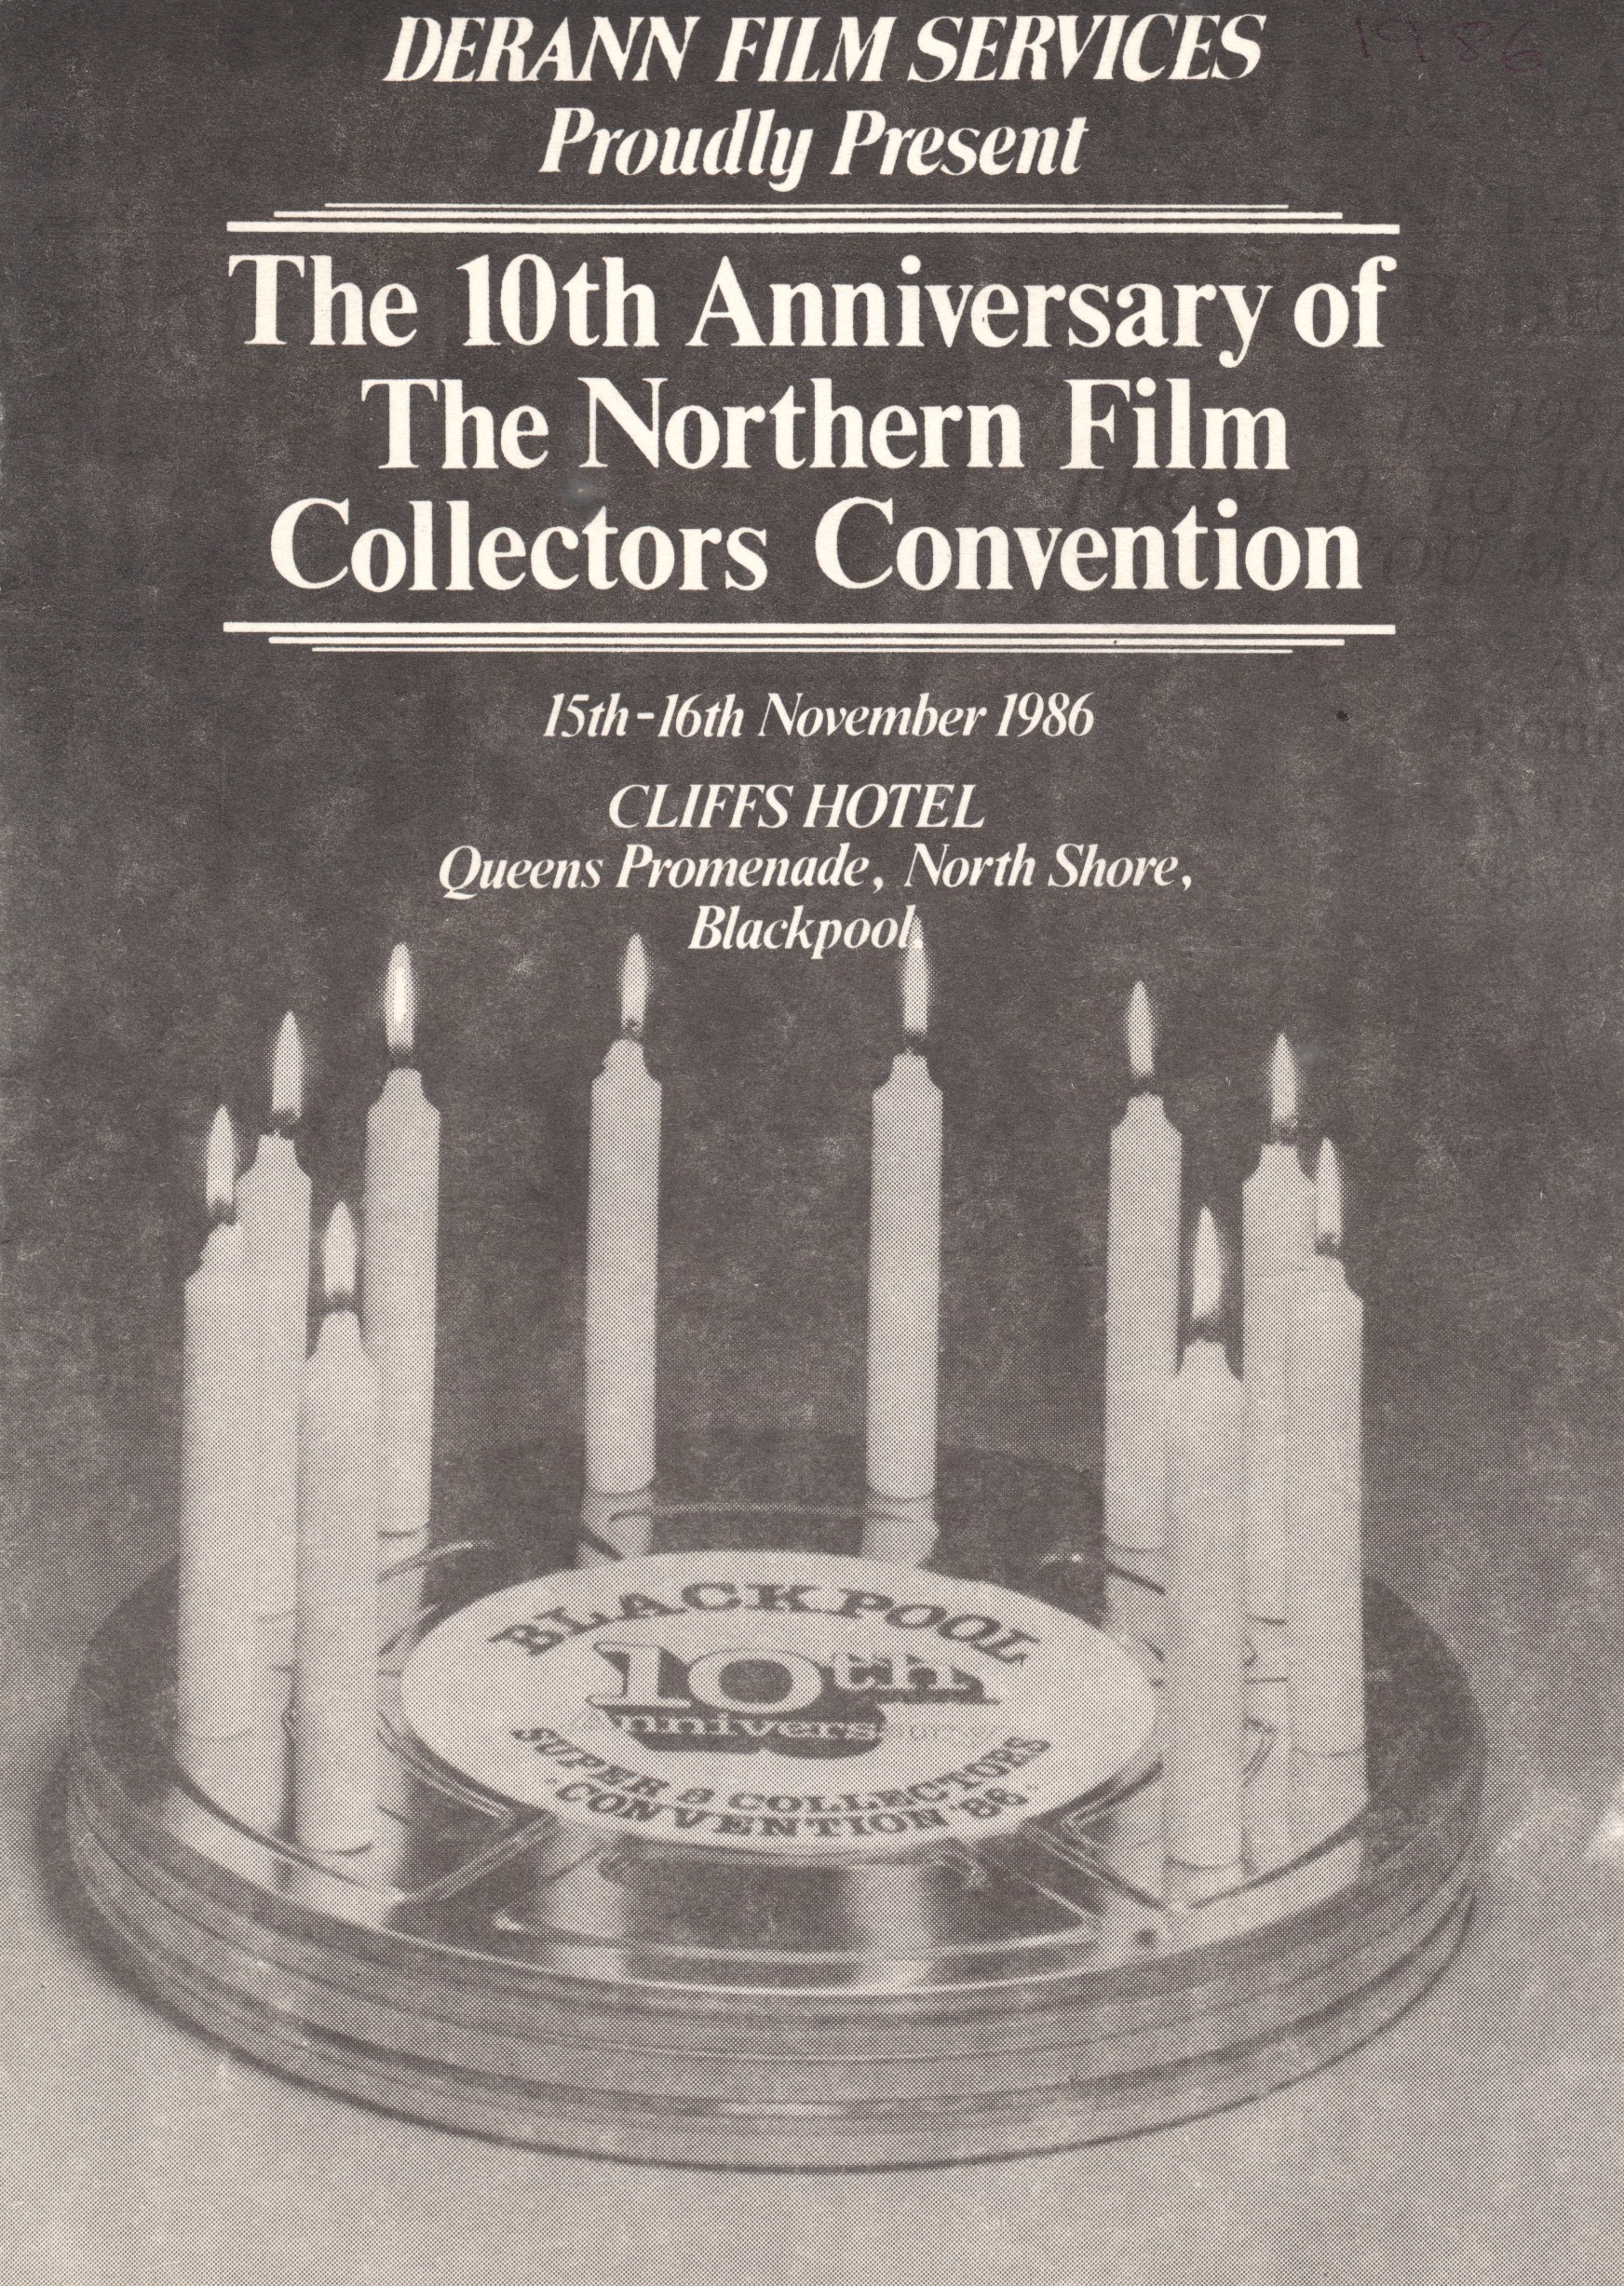 1986 Convention Dinner programme, page 1